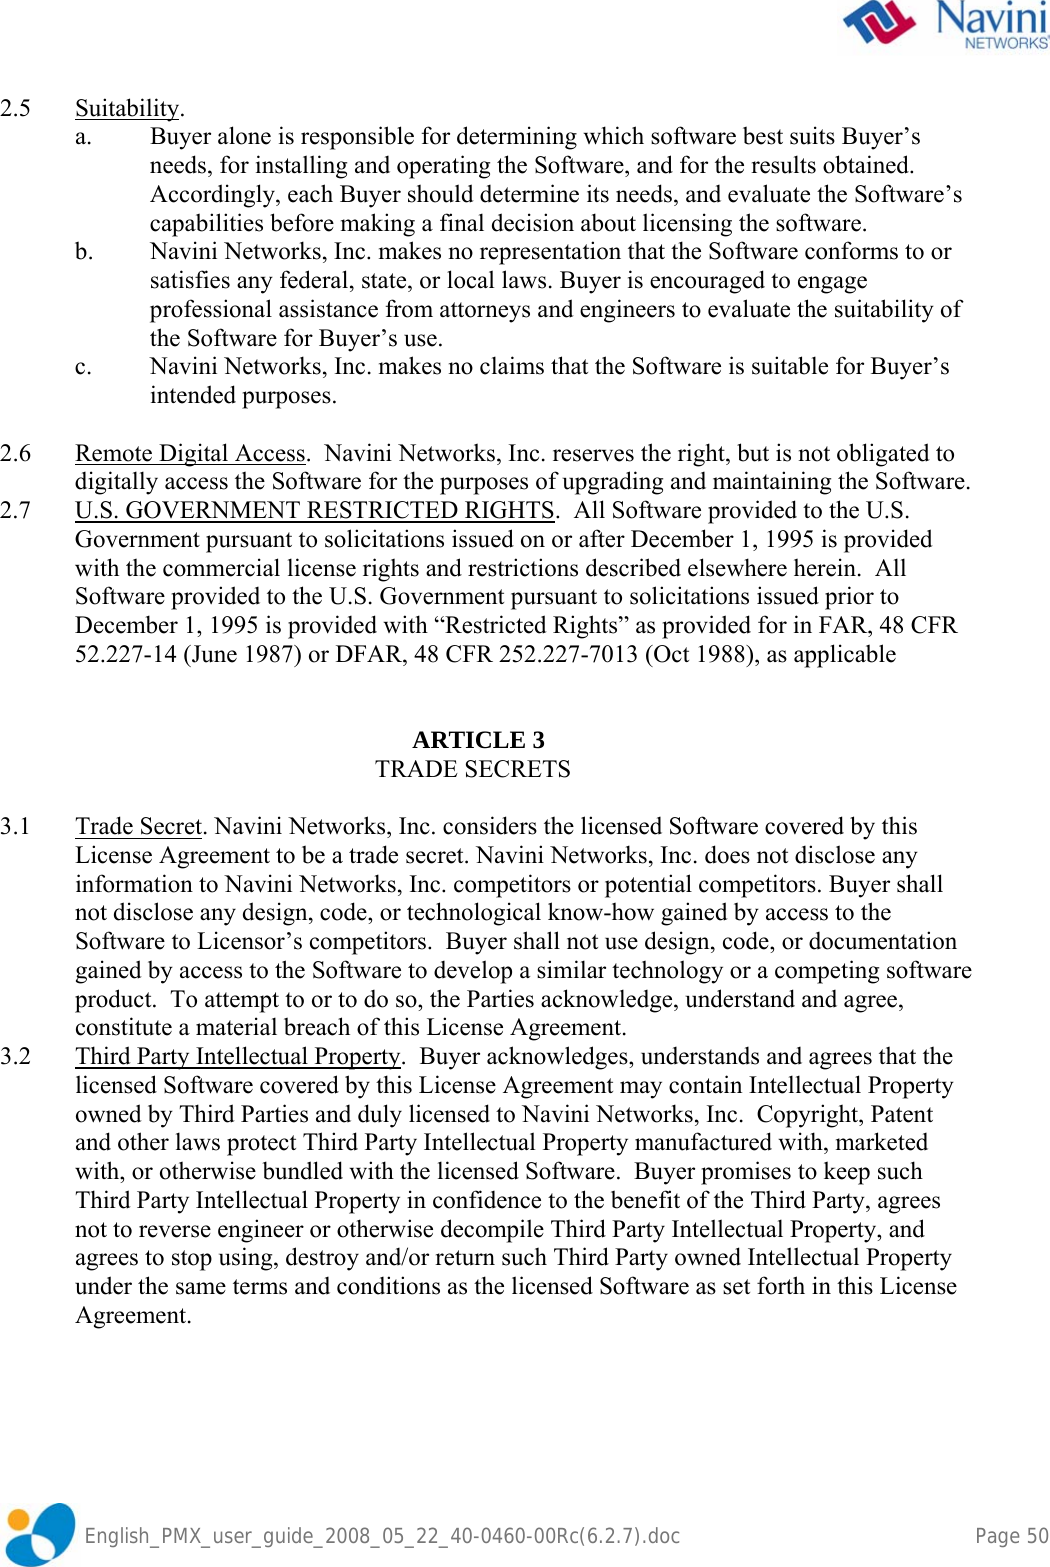               English_PMX_user_guide_2008_05_22_40-0460-00Rc(6.2.7).doc        Page 50 2.5 Suitability. a.  Buyer alone is responsible for determining which software best suits Buyer’s needs, for installing and operating the Software, and for the results obtained. Accordingly, each Buyer should determine its needs, and evaluate the Software’s capabilities before making a final decision about licensing the software. b.  Navini Networks, Inc. makes no representation that the Software conforms to or satisfies any federal, state, or local laws. Buyer is encouraged to engage professional assistance from attorneys and engineers to evaluate the suitability of the Software for Buyer’s use. c.  Navini Networks, Inc. makes no claims that the Software is suitable for Buyer’s intended purposes.  2.6  Remote Digital Access.  Navini Networks, Inc. reserves the right, but is not obligated to digitally access the Software for the purposes of upgrading and maintaining the Software. 2.7 U.S. GOVERNMENT RESTRICTED RIGHTS.  All Software provided to the U.S. Government pursuant to solicitations issued on or after December 1, 1995 is provided with the commercial license rights and restrictions described elsewhere herein.  All Software provided to the U.S. Government pursuant to solicitations issued prior to December 1, 1995 is provided with “Restricted Rights” as provided for in FAR, 48 CFR 52.227-14 (June 1987) or DFAR, 48 CFR 252.227-7013 (Oct 1988), as applicable             ARTICLE 3     TRADE SECRETS  3.1 Trade Secret. Navini Networks, Inc. considers the licensed Software covered by this License Agreement to be a trade secret. Navini Networks, Inc. does not disclose any information to Navini Networks, Inc. competitors or potential competitors. Buyer shall not disclose any design, code, or technological know-how gained by access to the Software to Licensor’s competitors.  Buyer shall not use design, code, or documentation gained by access to the Software to develop a similar technology or a competing software product.  To attempt to or to do so, the Parties acknowledge, understand and agree, constitute a material breach of this License Agreement.   3.2  Third Party Intellectual Property.  Buyer acknowledges, understands and agrees that the licensed Software covered by this License Agreement may contain Intellectual Property owned by Third Parties and duly licensed to Navini Networks, Inc.  Copyright, Patent and other laws protect Third Party Intellectual Property manufactured with, marketed with, or otherwise bundled with the licensed Software.  Buyer promises to keep such Third Party Intellectual Property in confidence to the benefit of the Third Party, agrees not to reverse engineer or otherwise decompile Third Party Intellectual Property, and agrees to stop using, destroy and/or return such Third Party owned Intellectual Property under the same terms and conditions as the licensed Software as set forth in this License Agreement.     